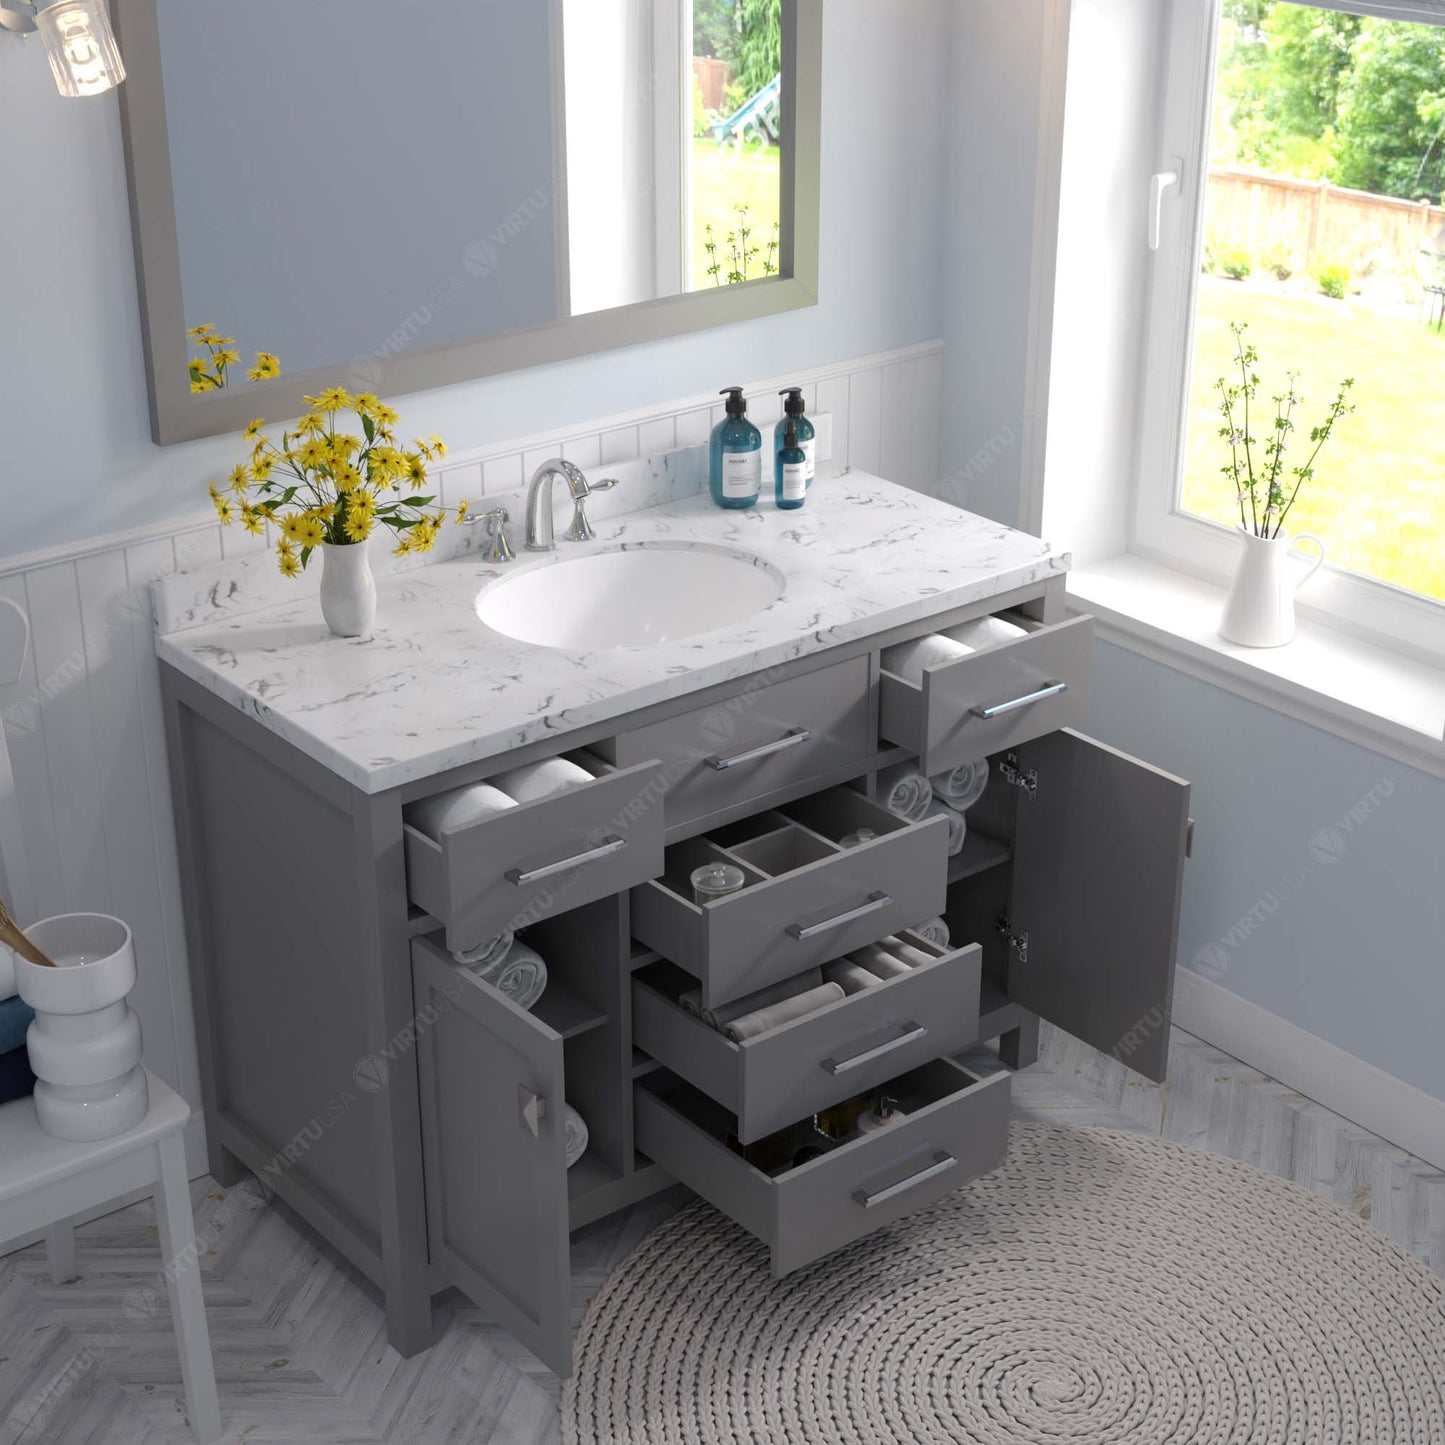 Virtu USA Caroline 48" Single Bath Vanity in Cashmere Gray with White Quartz Top and Round Sink with Polished Chrome Faucet with Matching Mirror - Luxe Bathroom Vanities